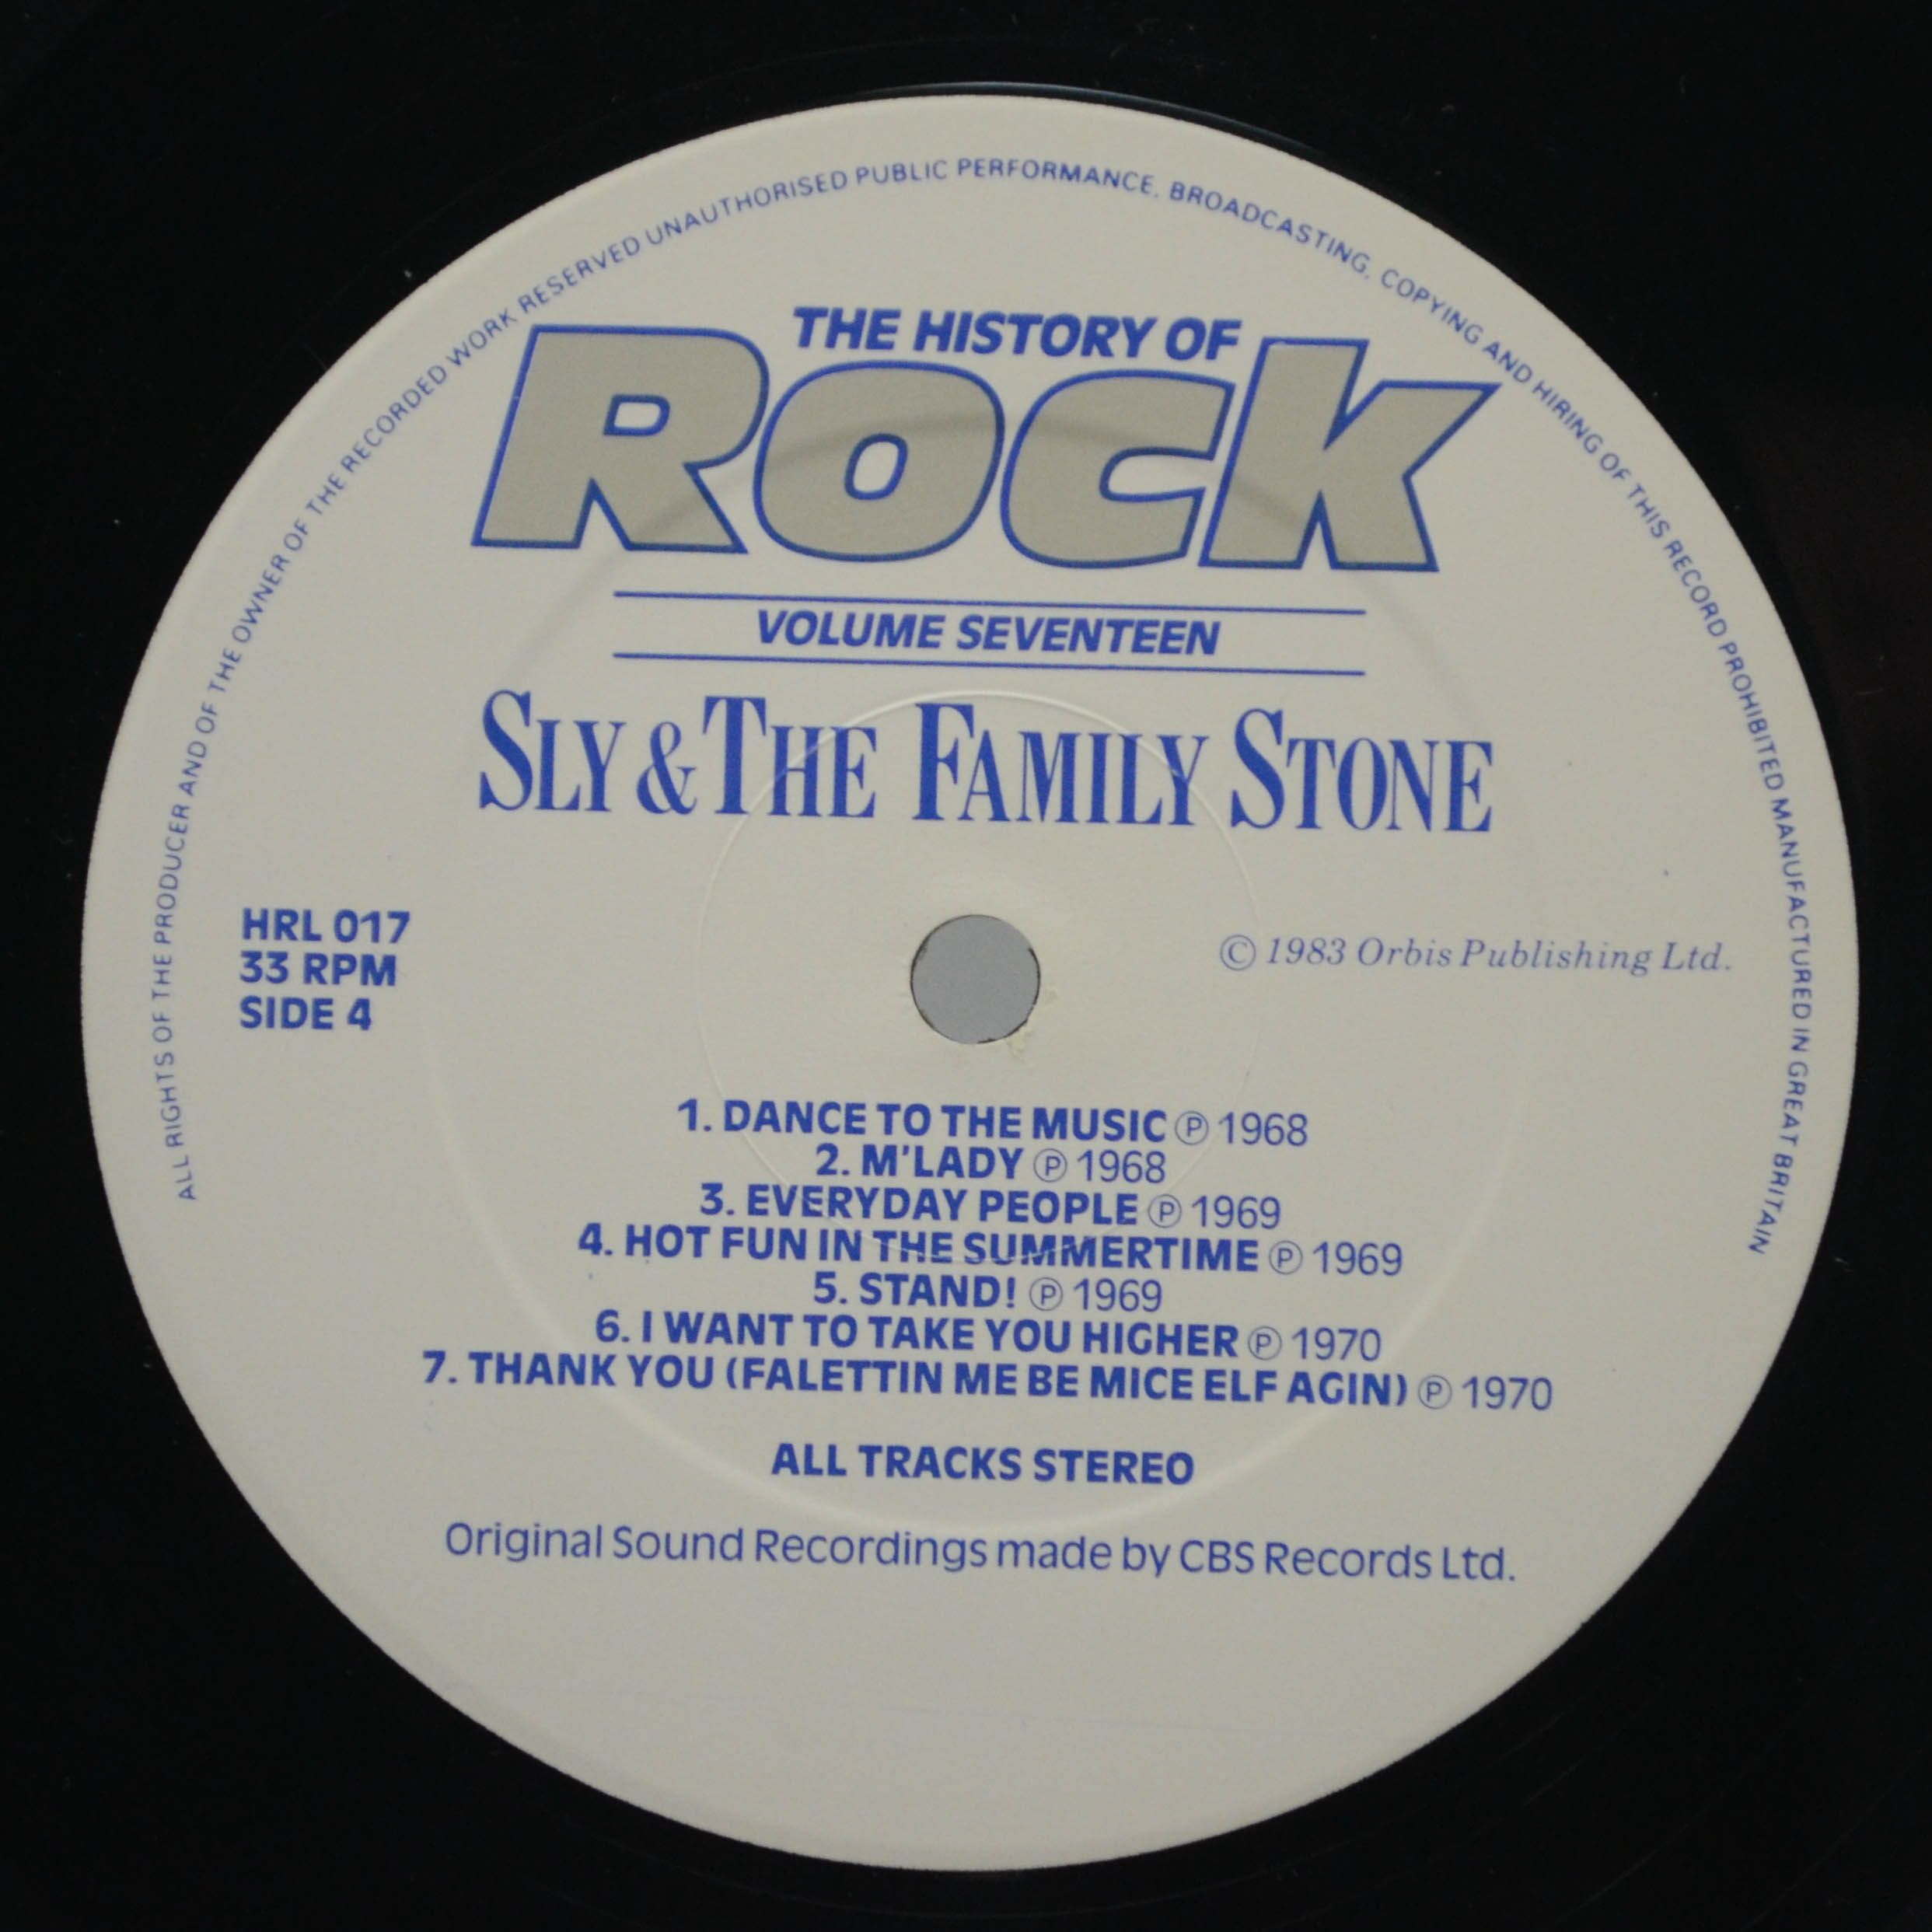 Creedence Clearwater Revival / Ten Years After / Jefferson Airplane / Sly & The Family Stone — The History Of Rock (Volume Seventeen) (2LP, UK), 1983